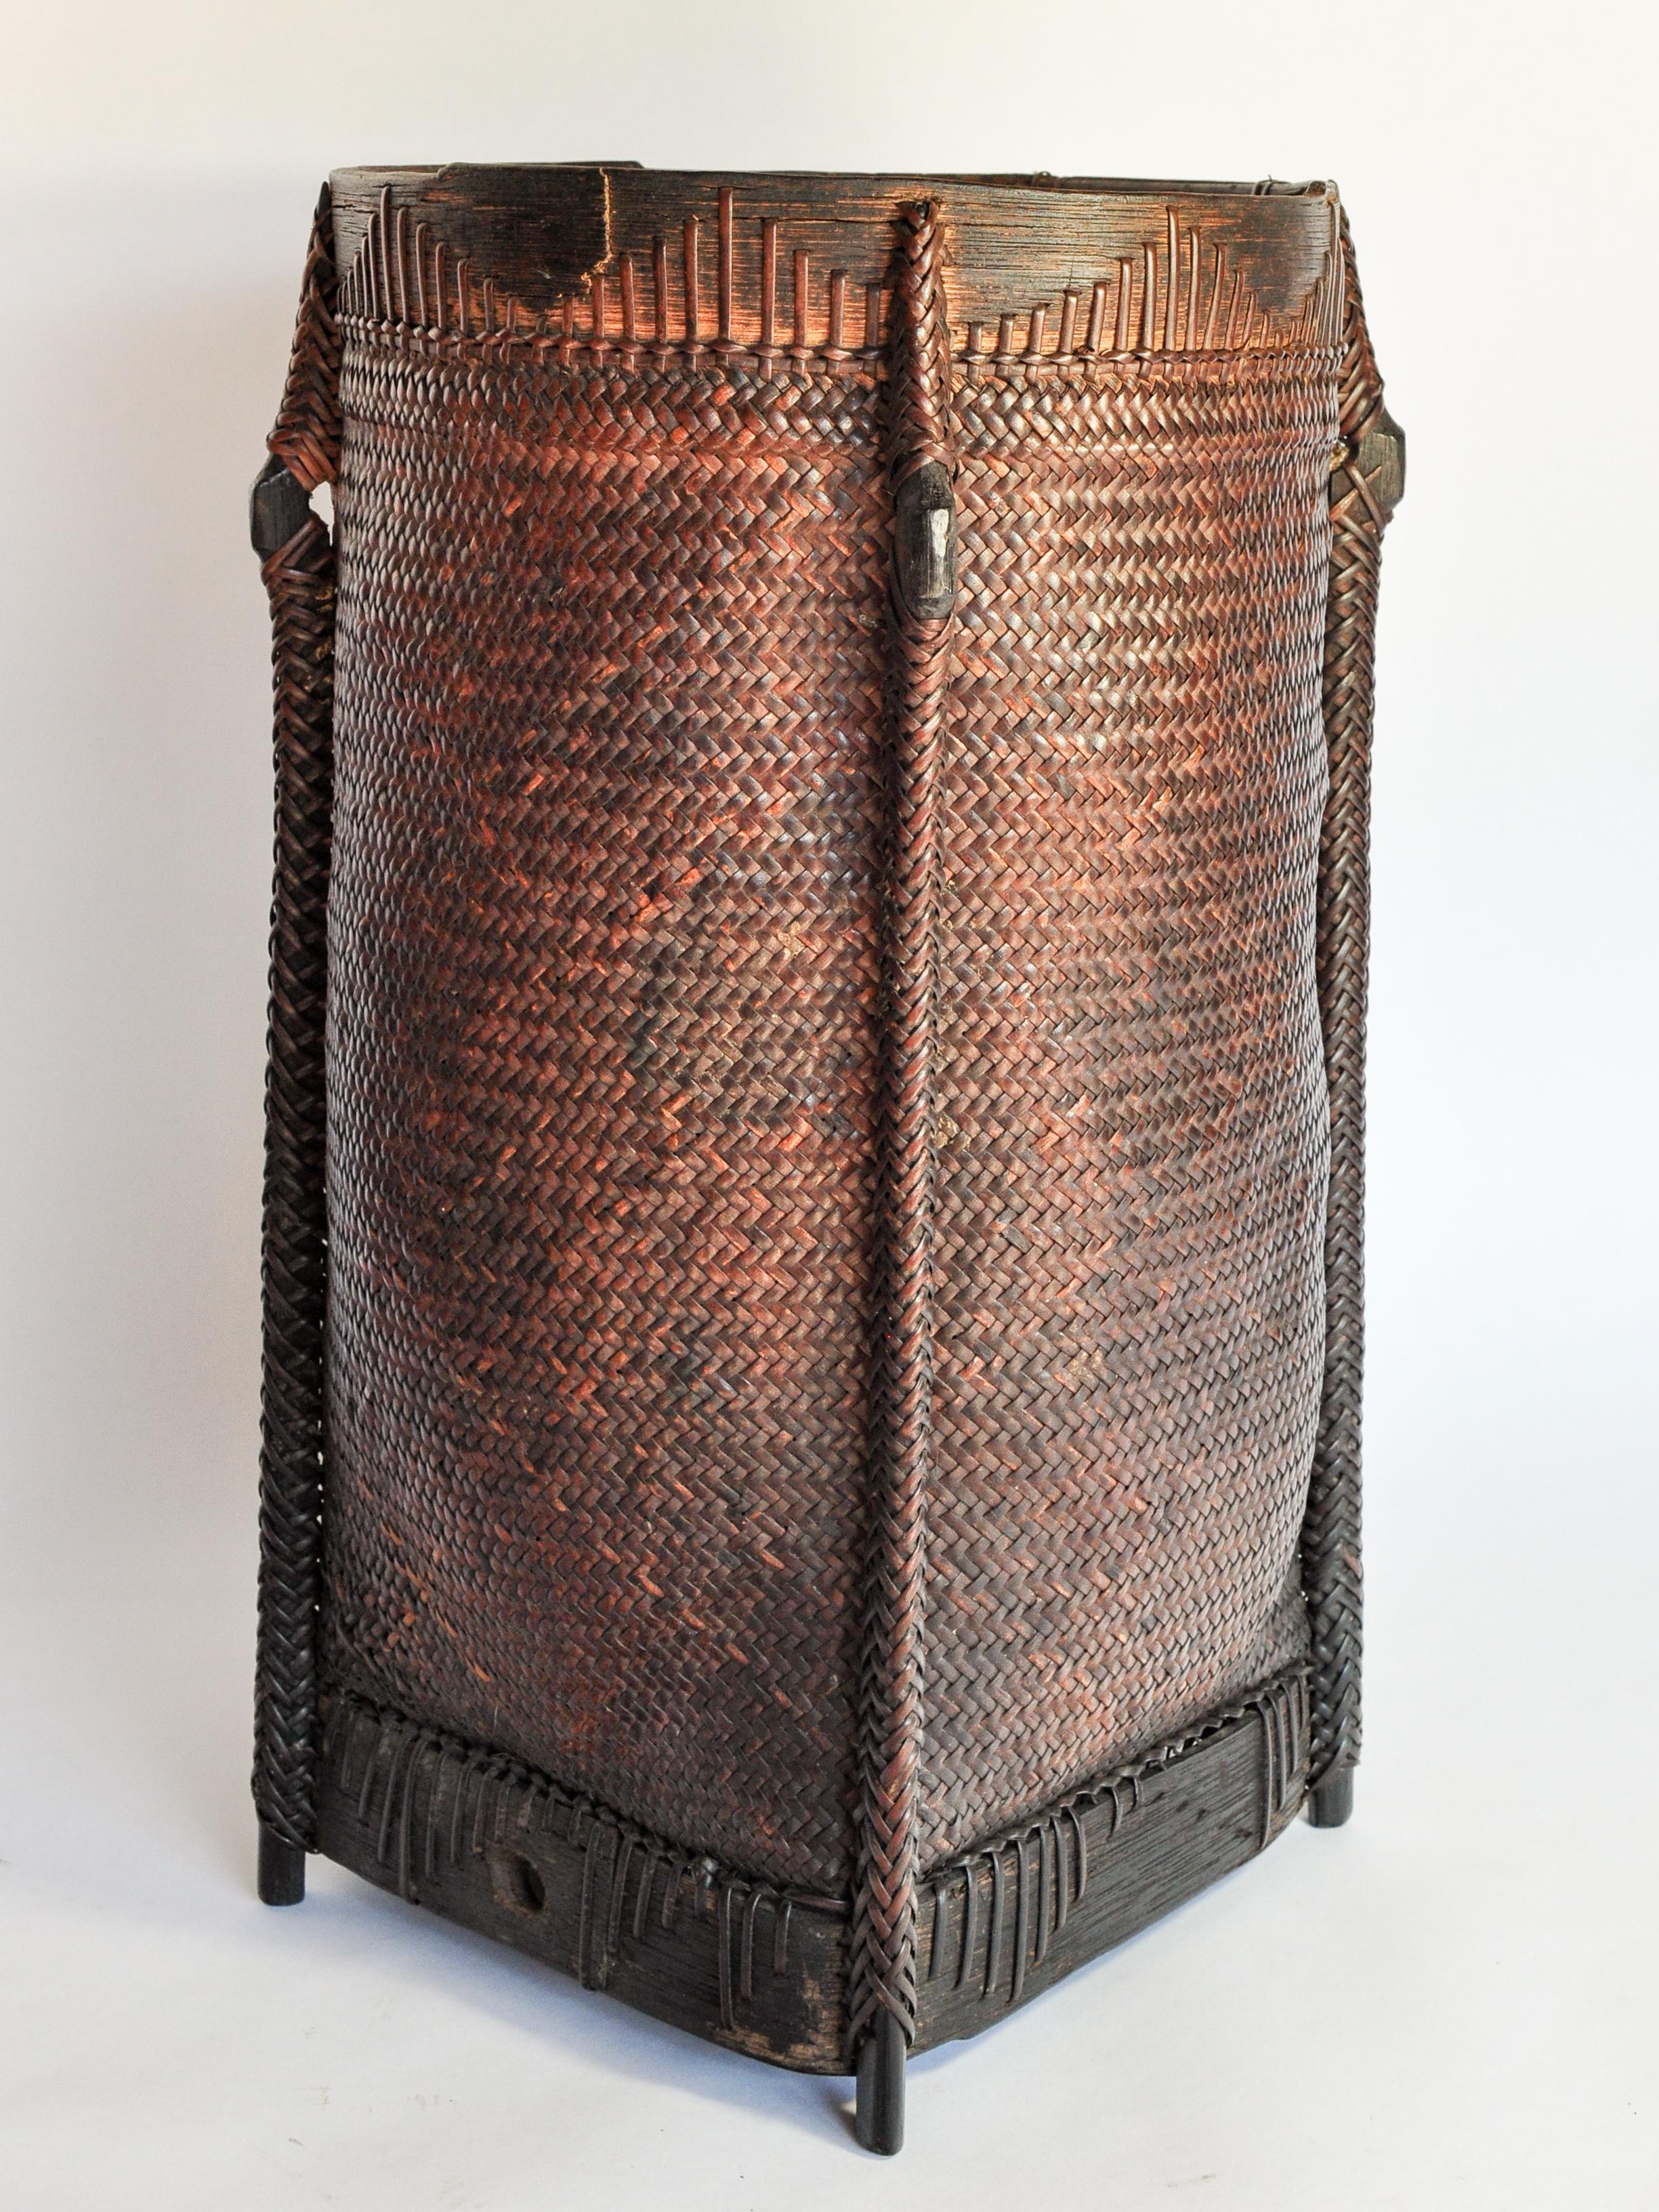 Tribal Carrying and Storage Basket from Borneo, Mid-20th Century 2